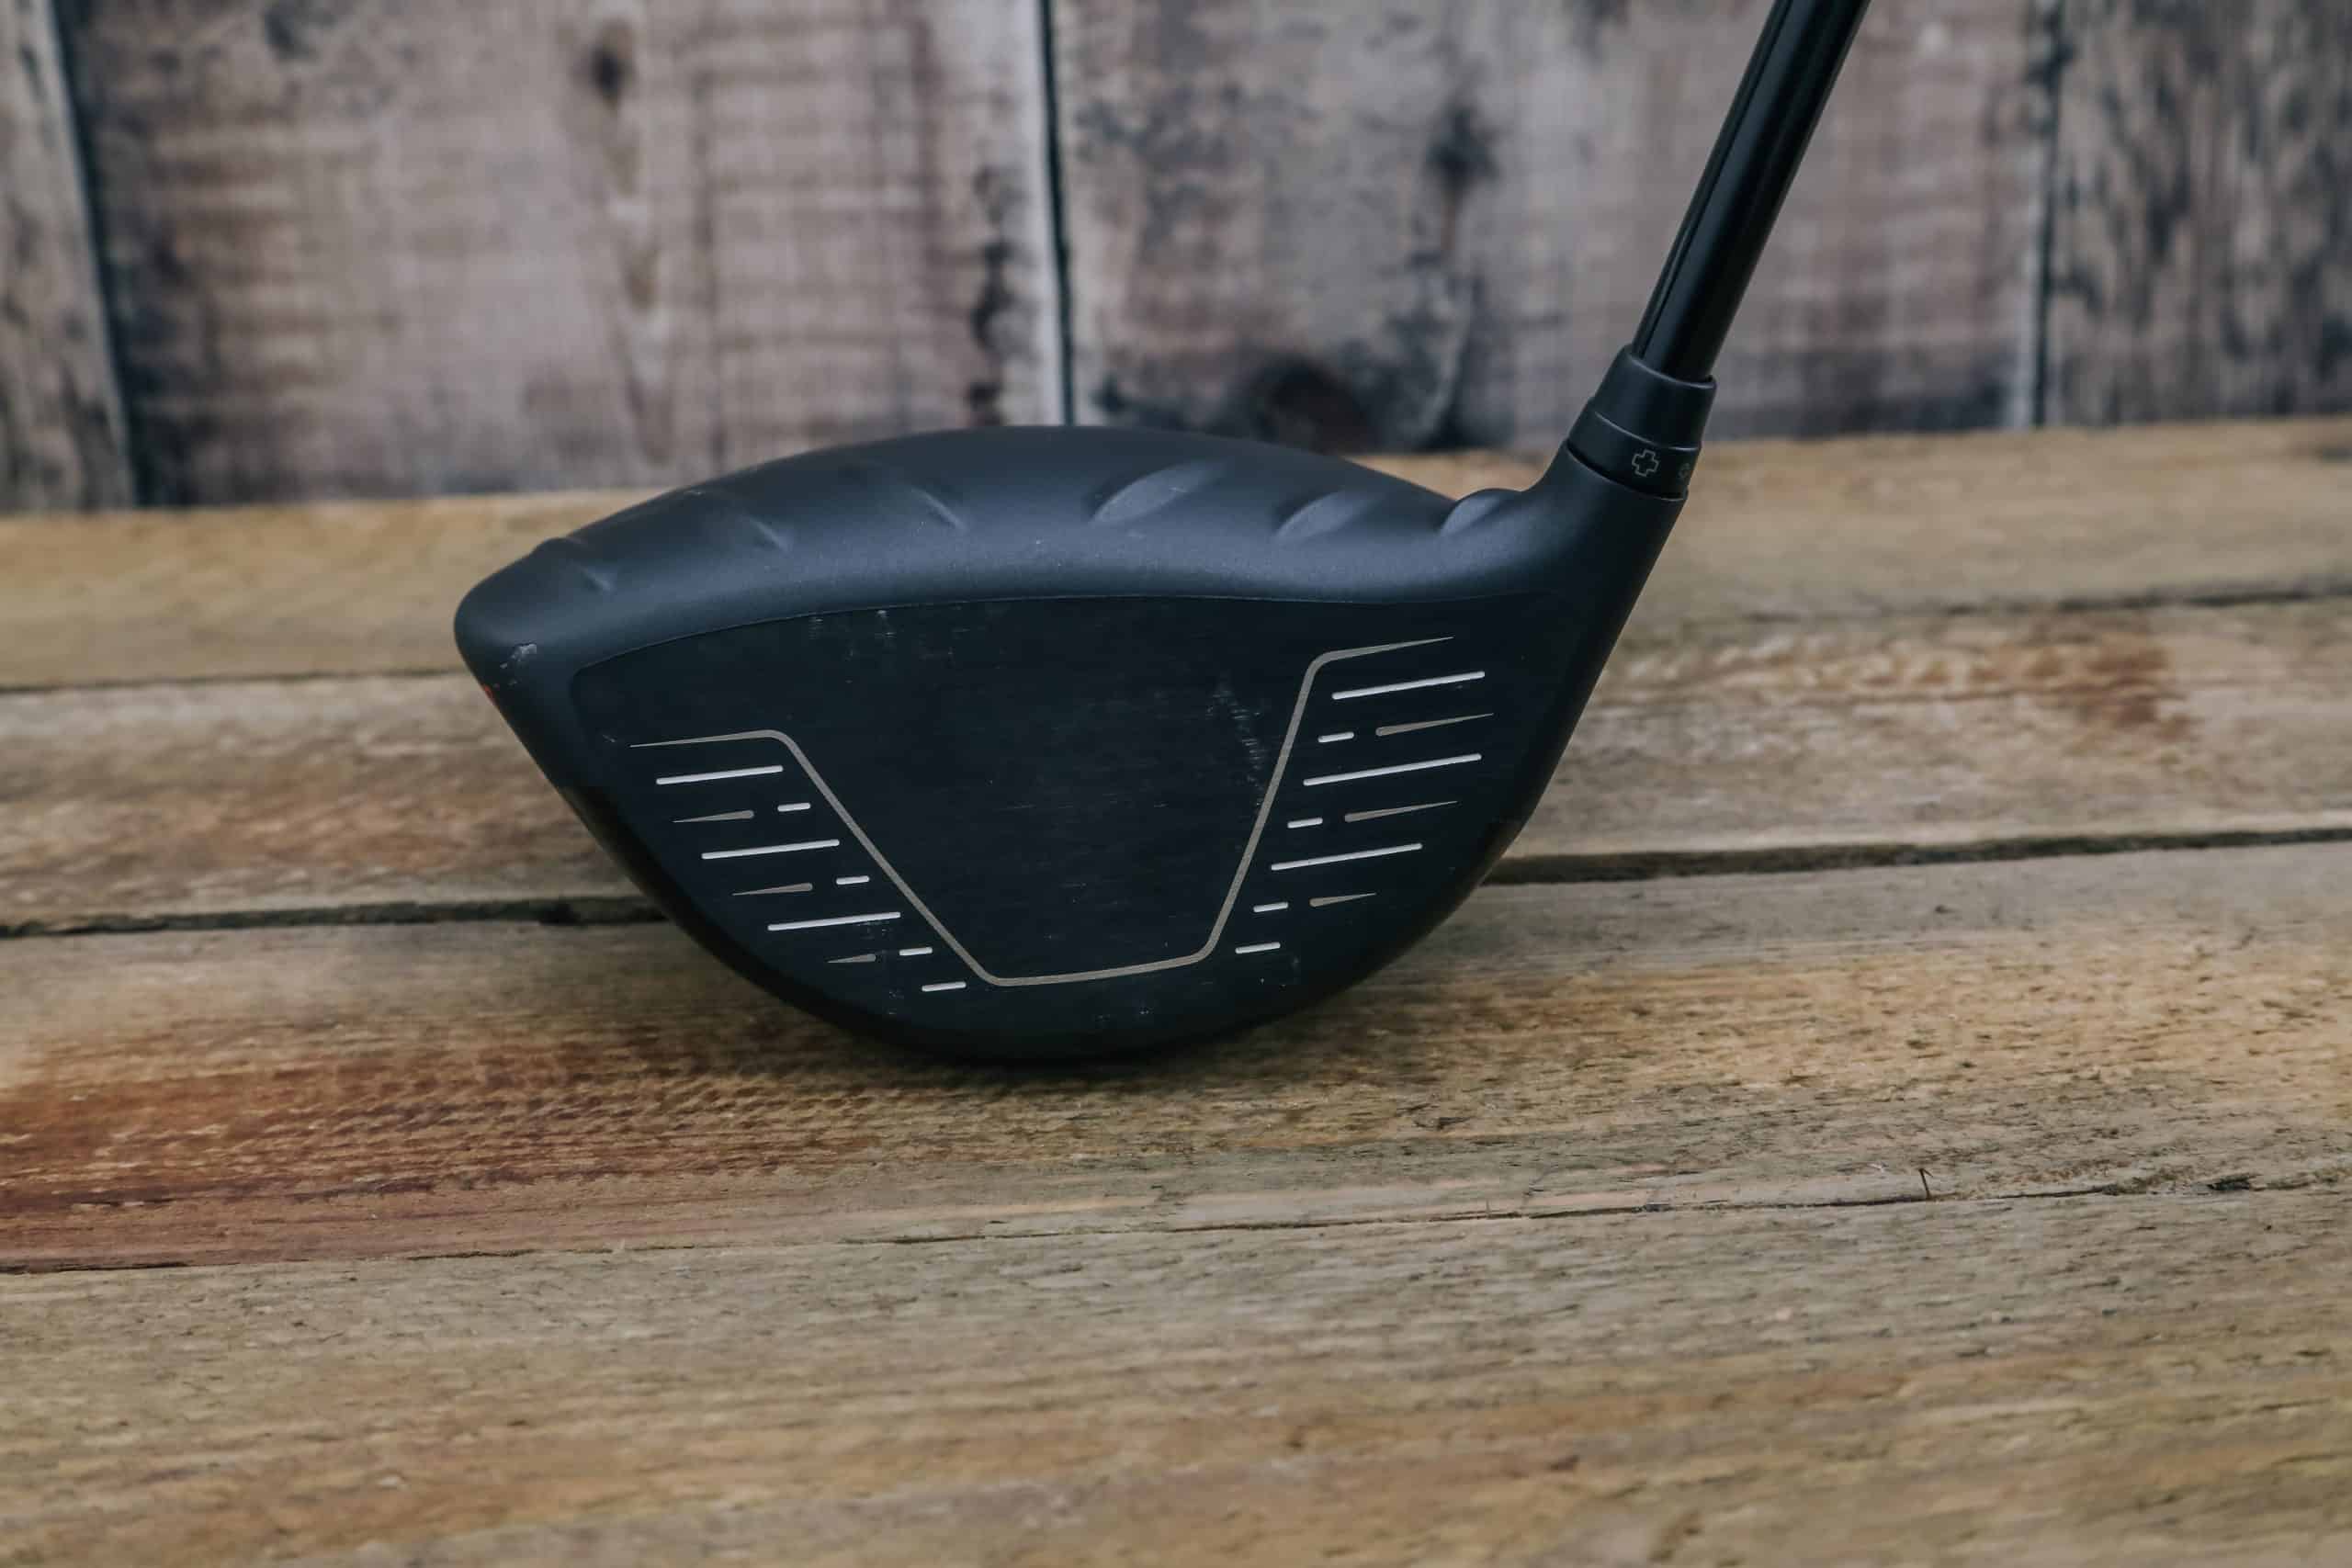 PING G425 Max - Has one of the most forgiving drivers been made better